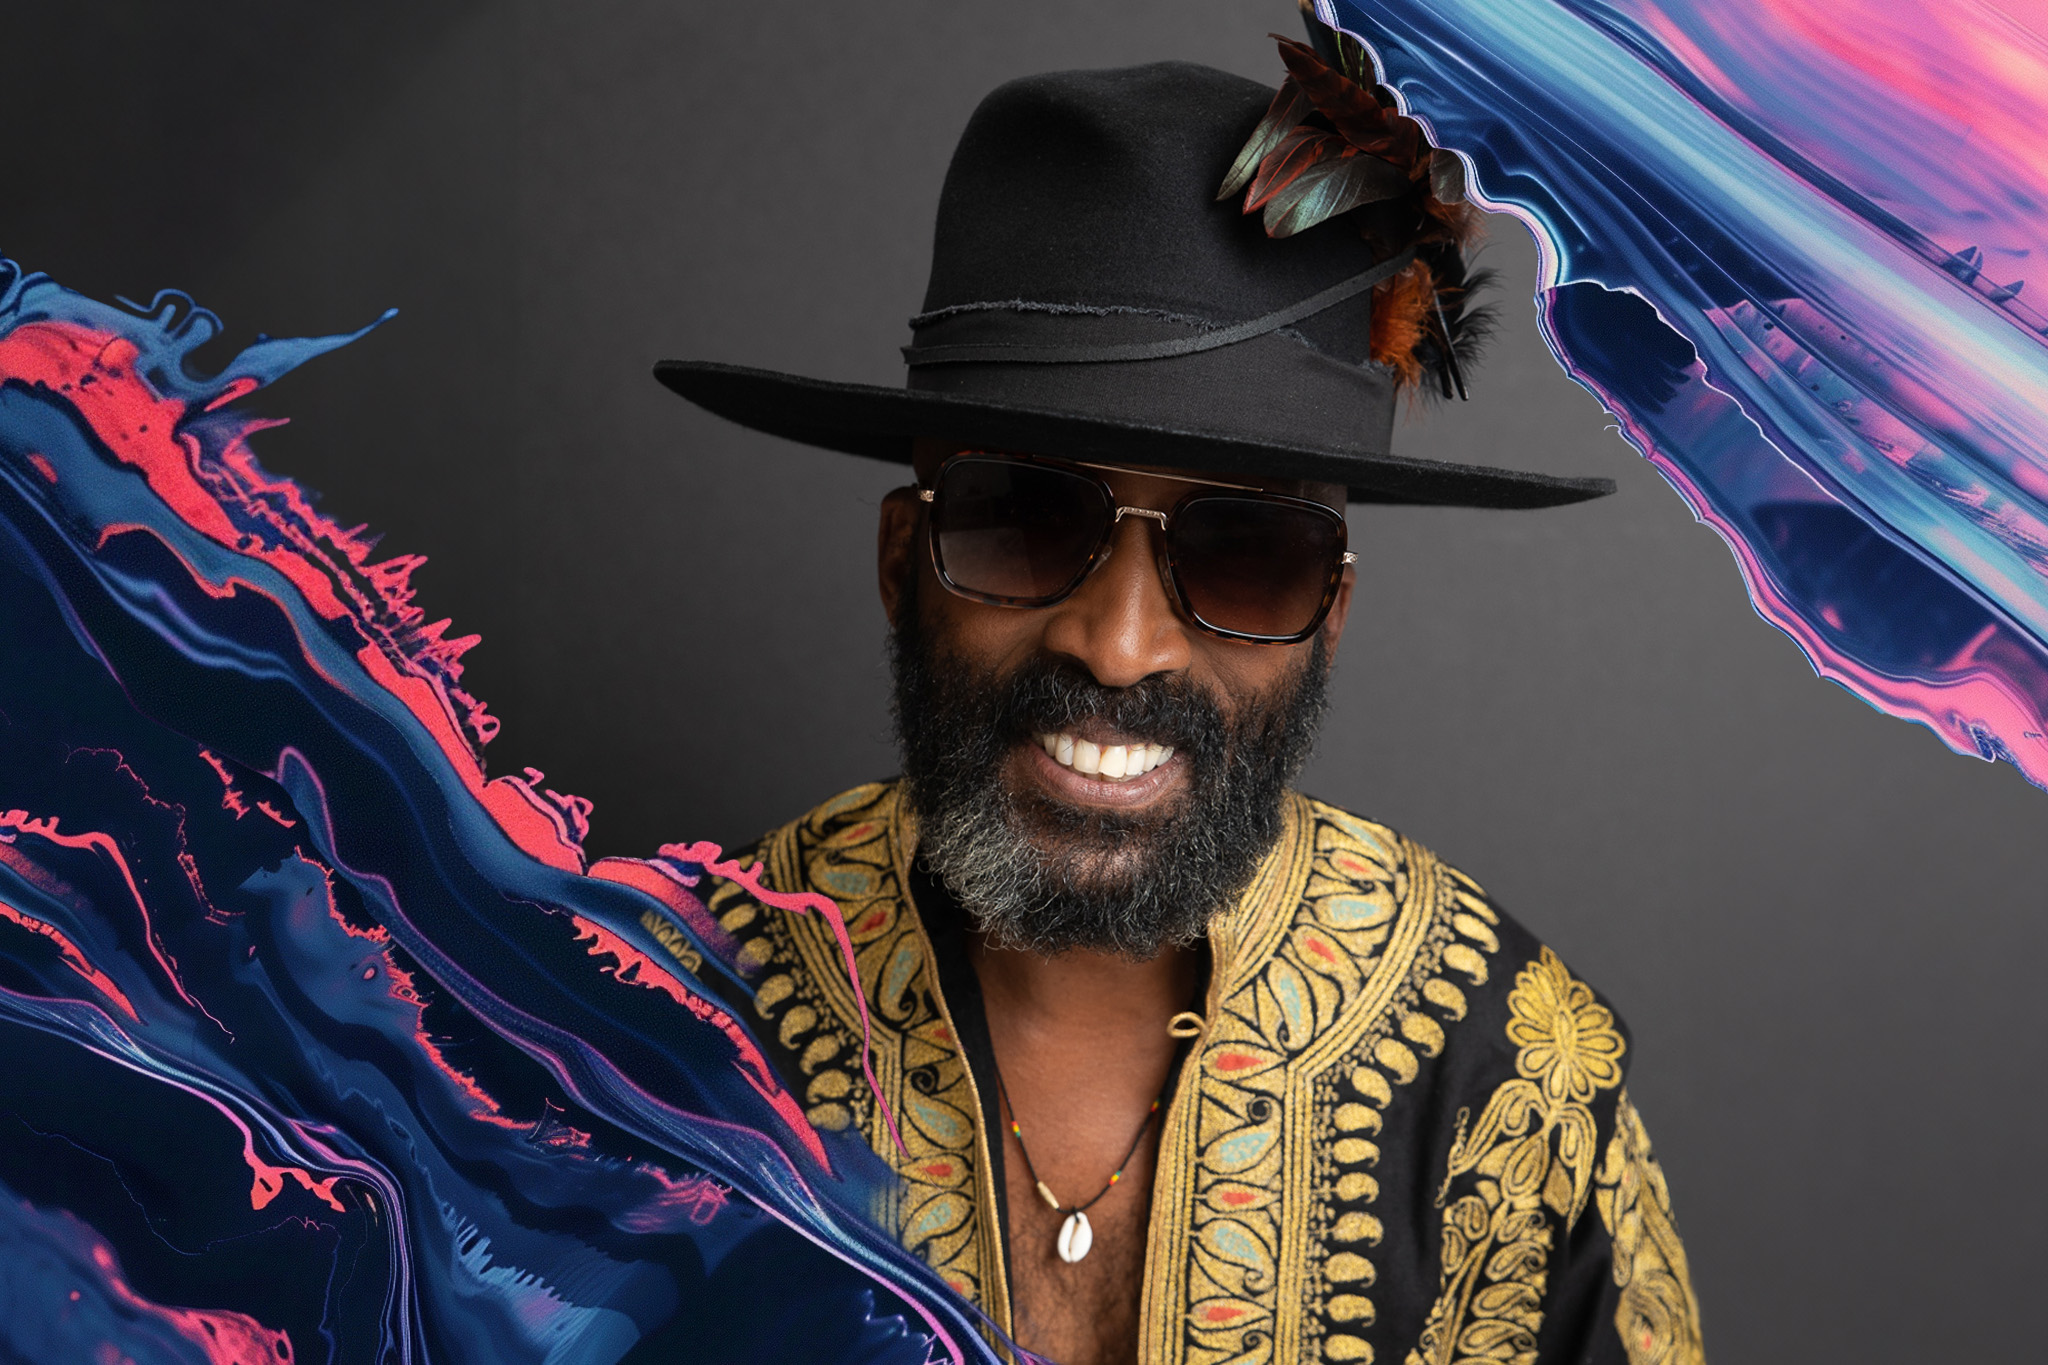 The musician D'Wayne Wiggins wears a black cowboy hat, sunglasses and gold shirt while smiling into the camera for a posed portrait.